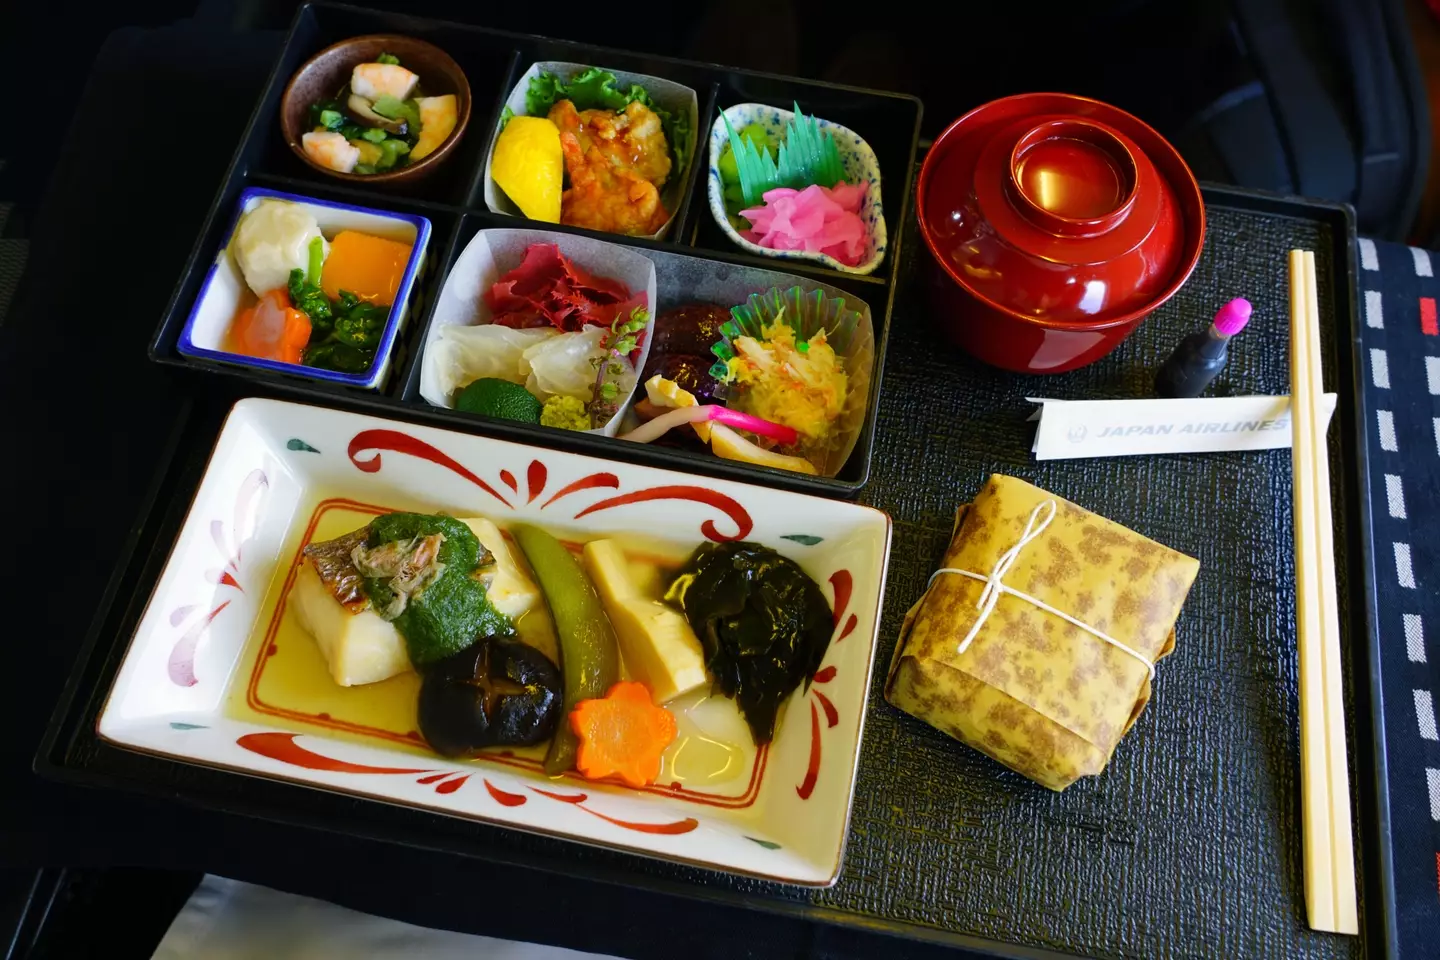 A meal served in First Class on a Japan Airlines flight, but passengers can now opt out of having a meal as part of their journey.